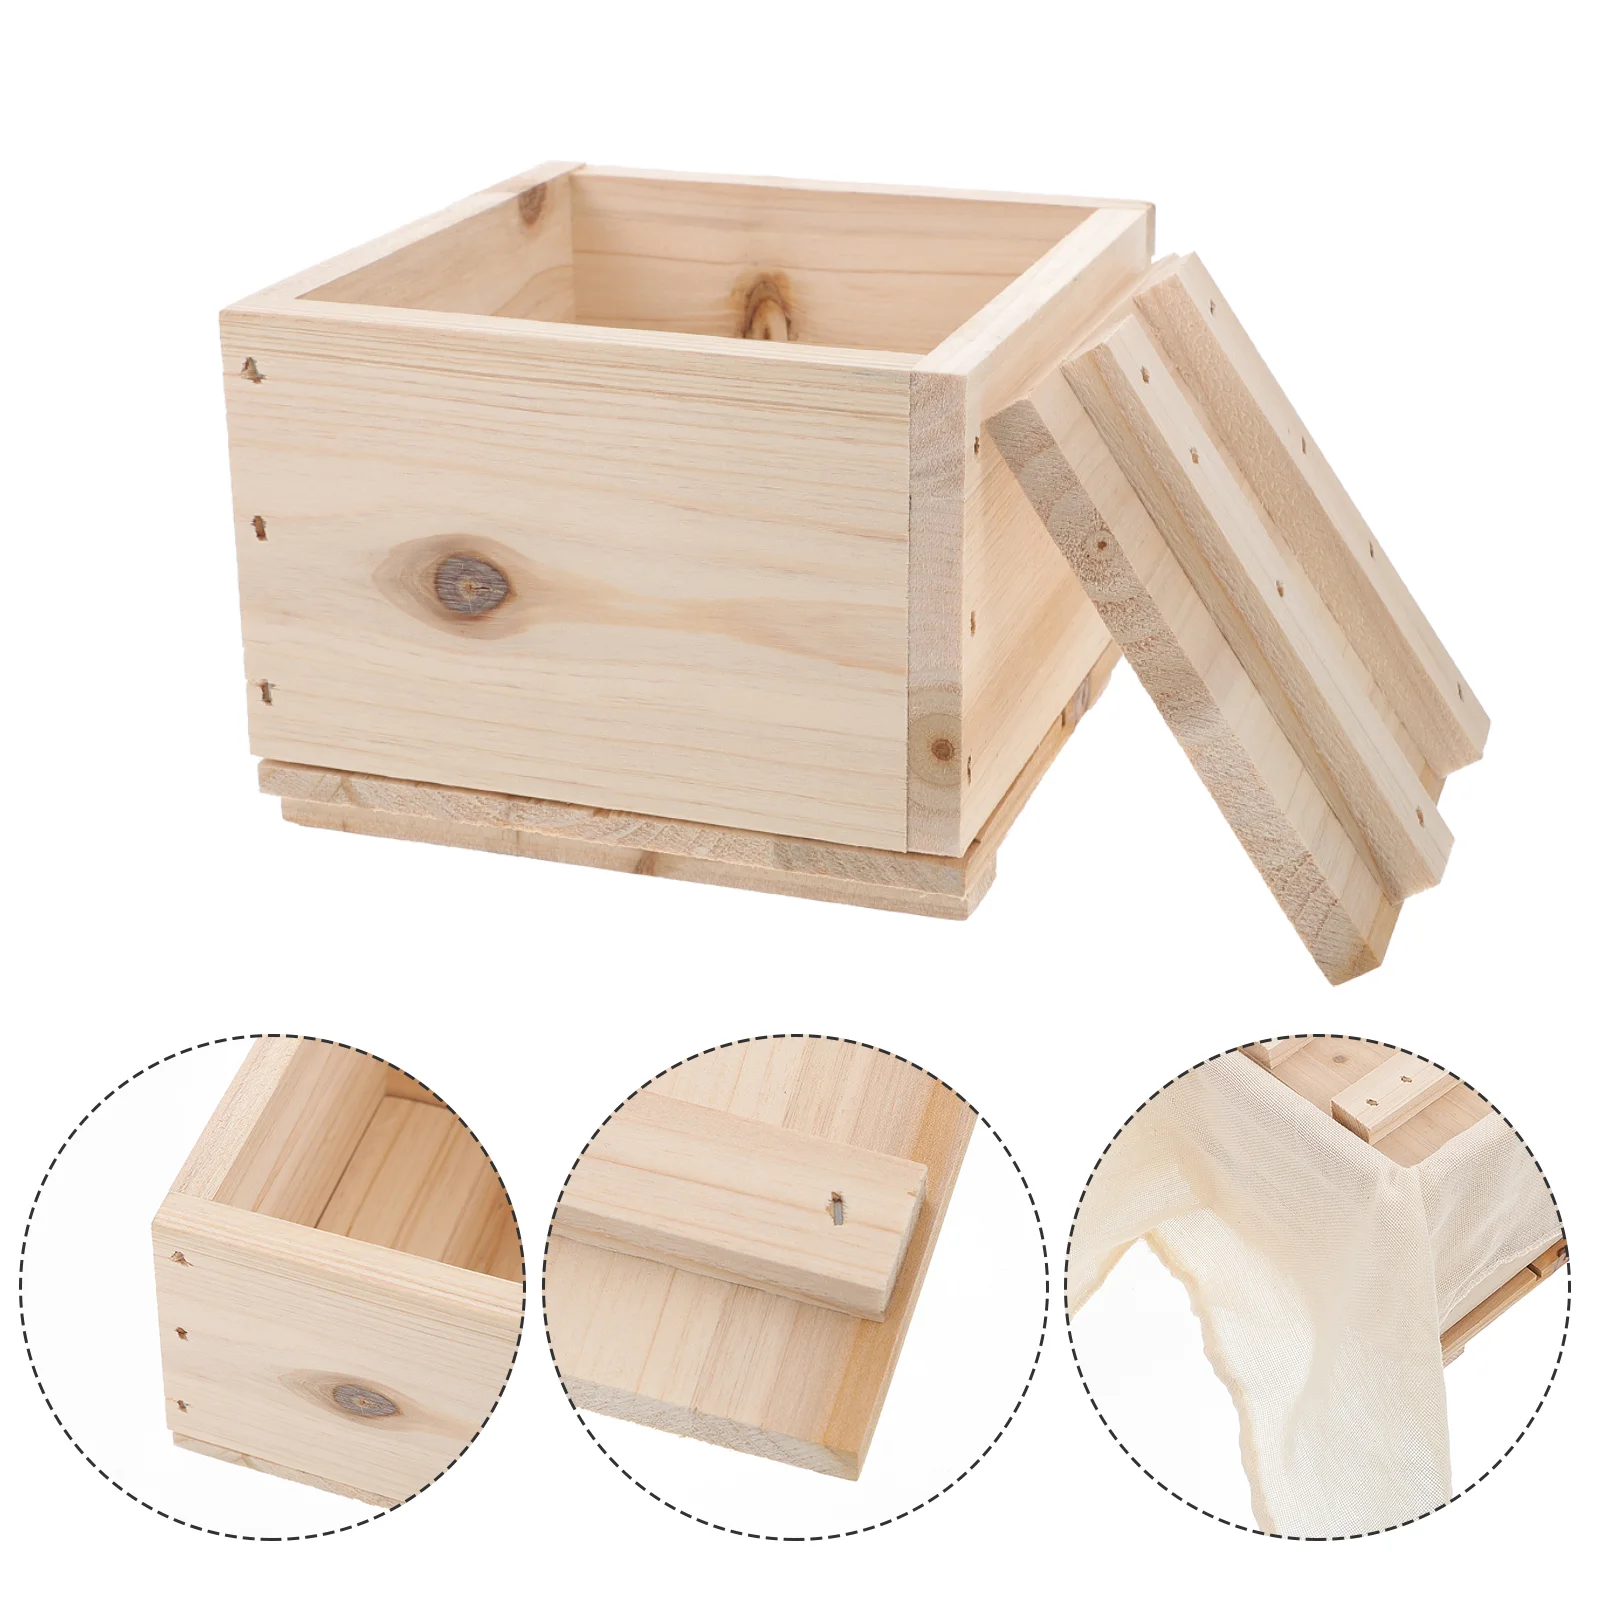 

Tofu Press Making Maker Tool Diy Box Pressing Mold Presser Home Mould Tray Cheesemaking Wooden Cheese Homemade Kitchen Drainer